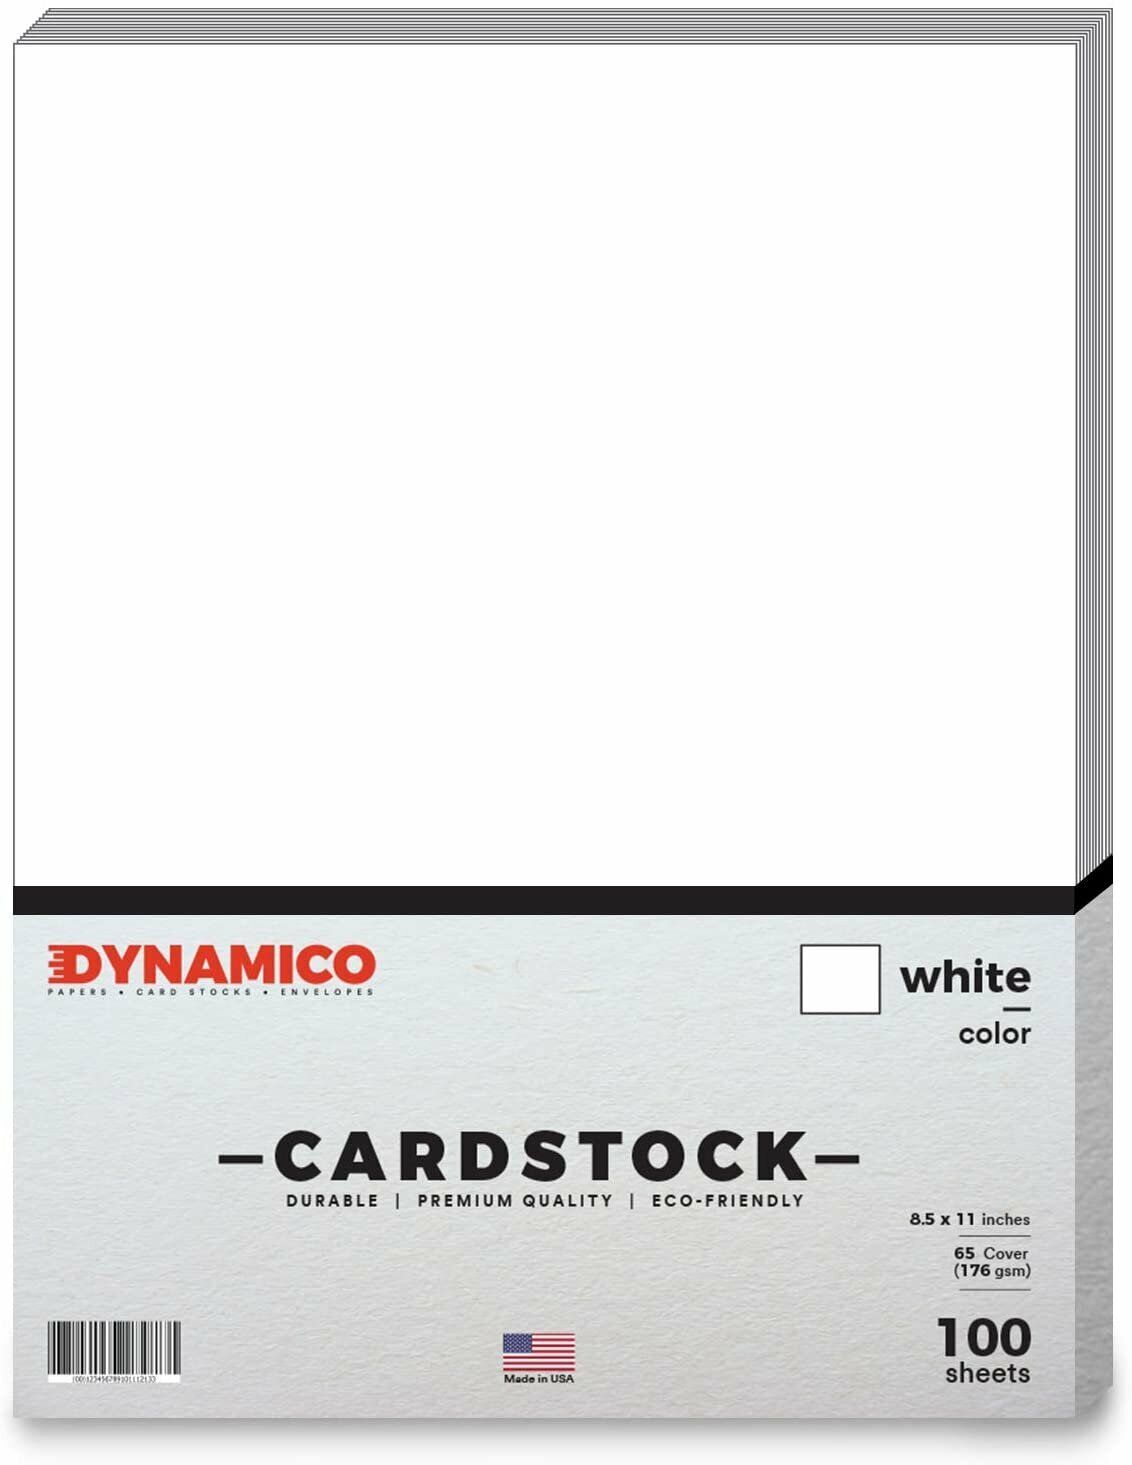 White Bright Color Cardstock, 65lb Cover (176GSM), 8.5 x 11, 100